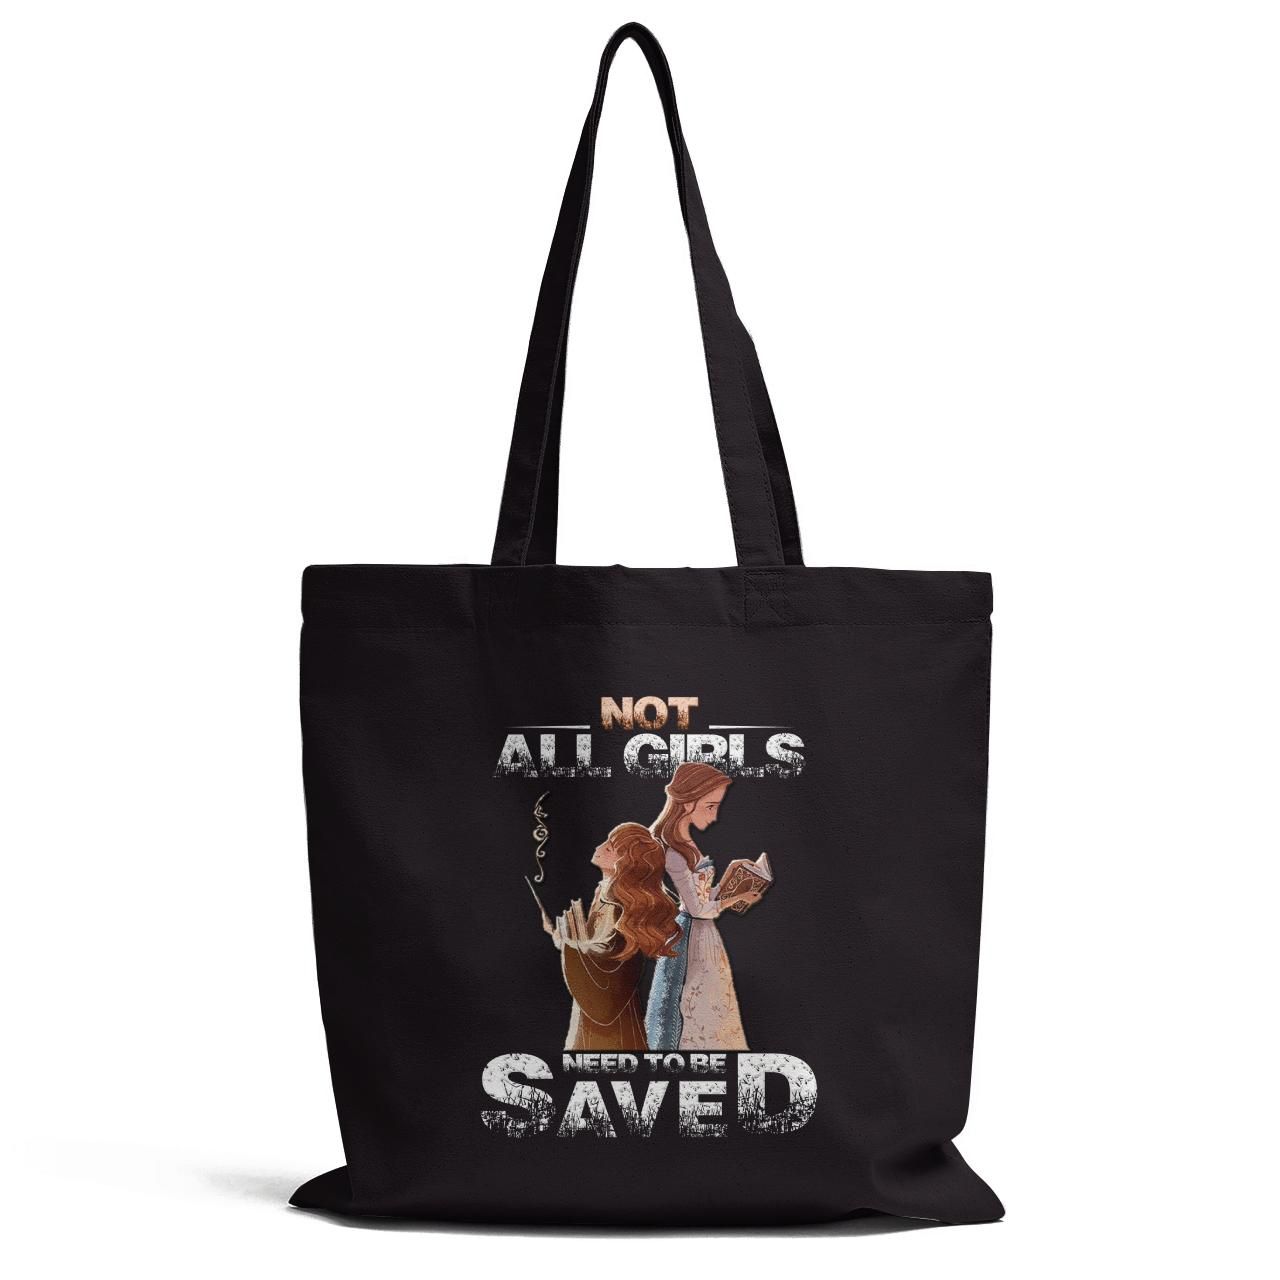 Not All Girls Need To Be Saved Tote Bag